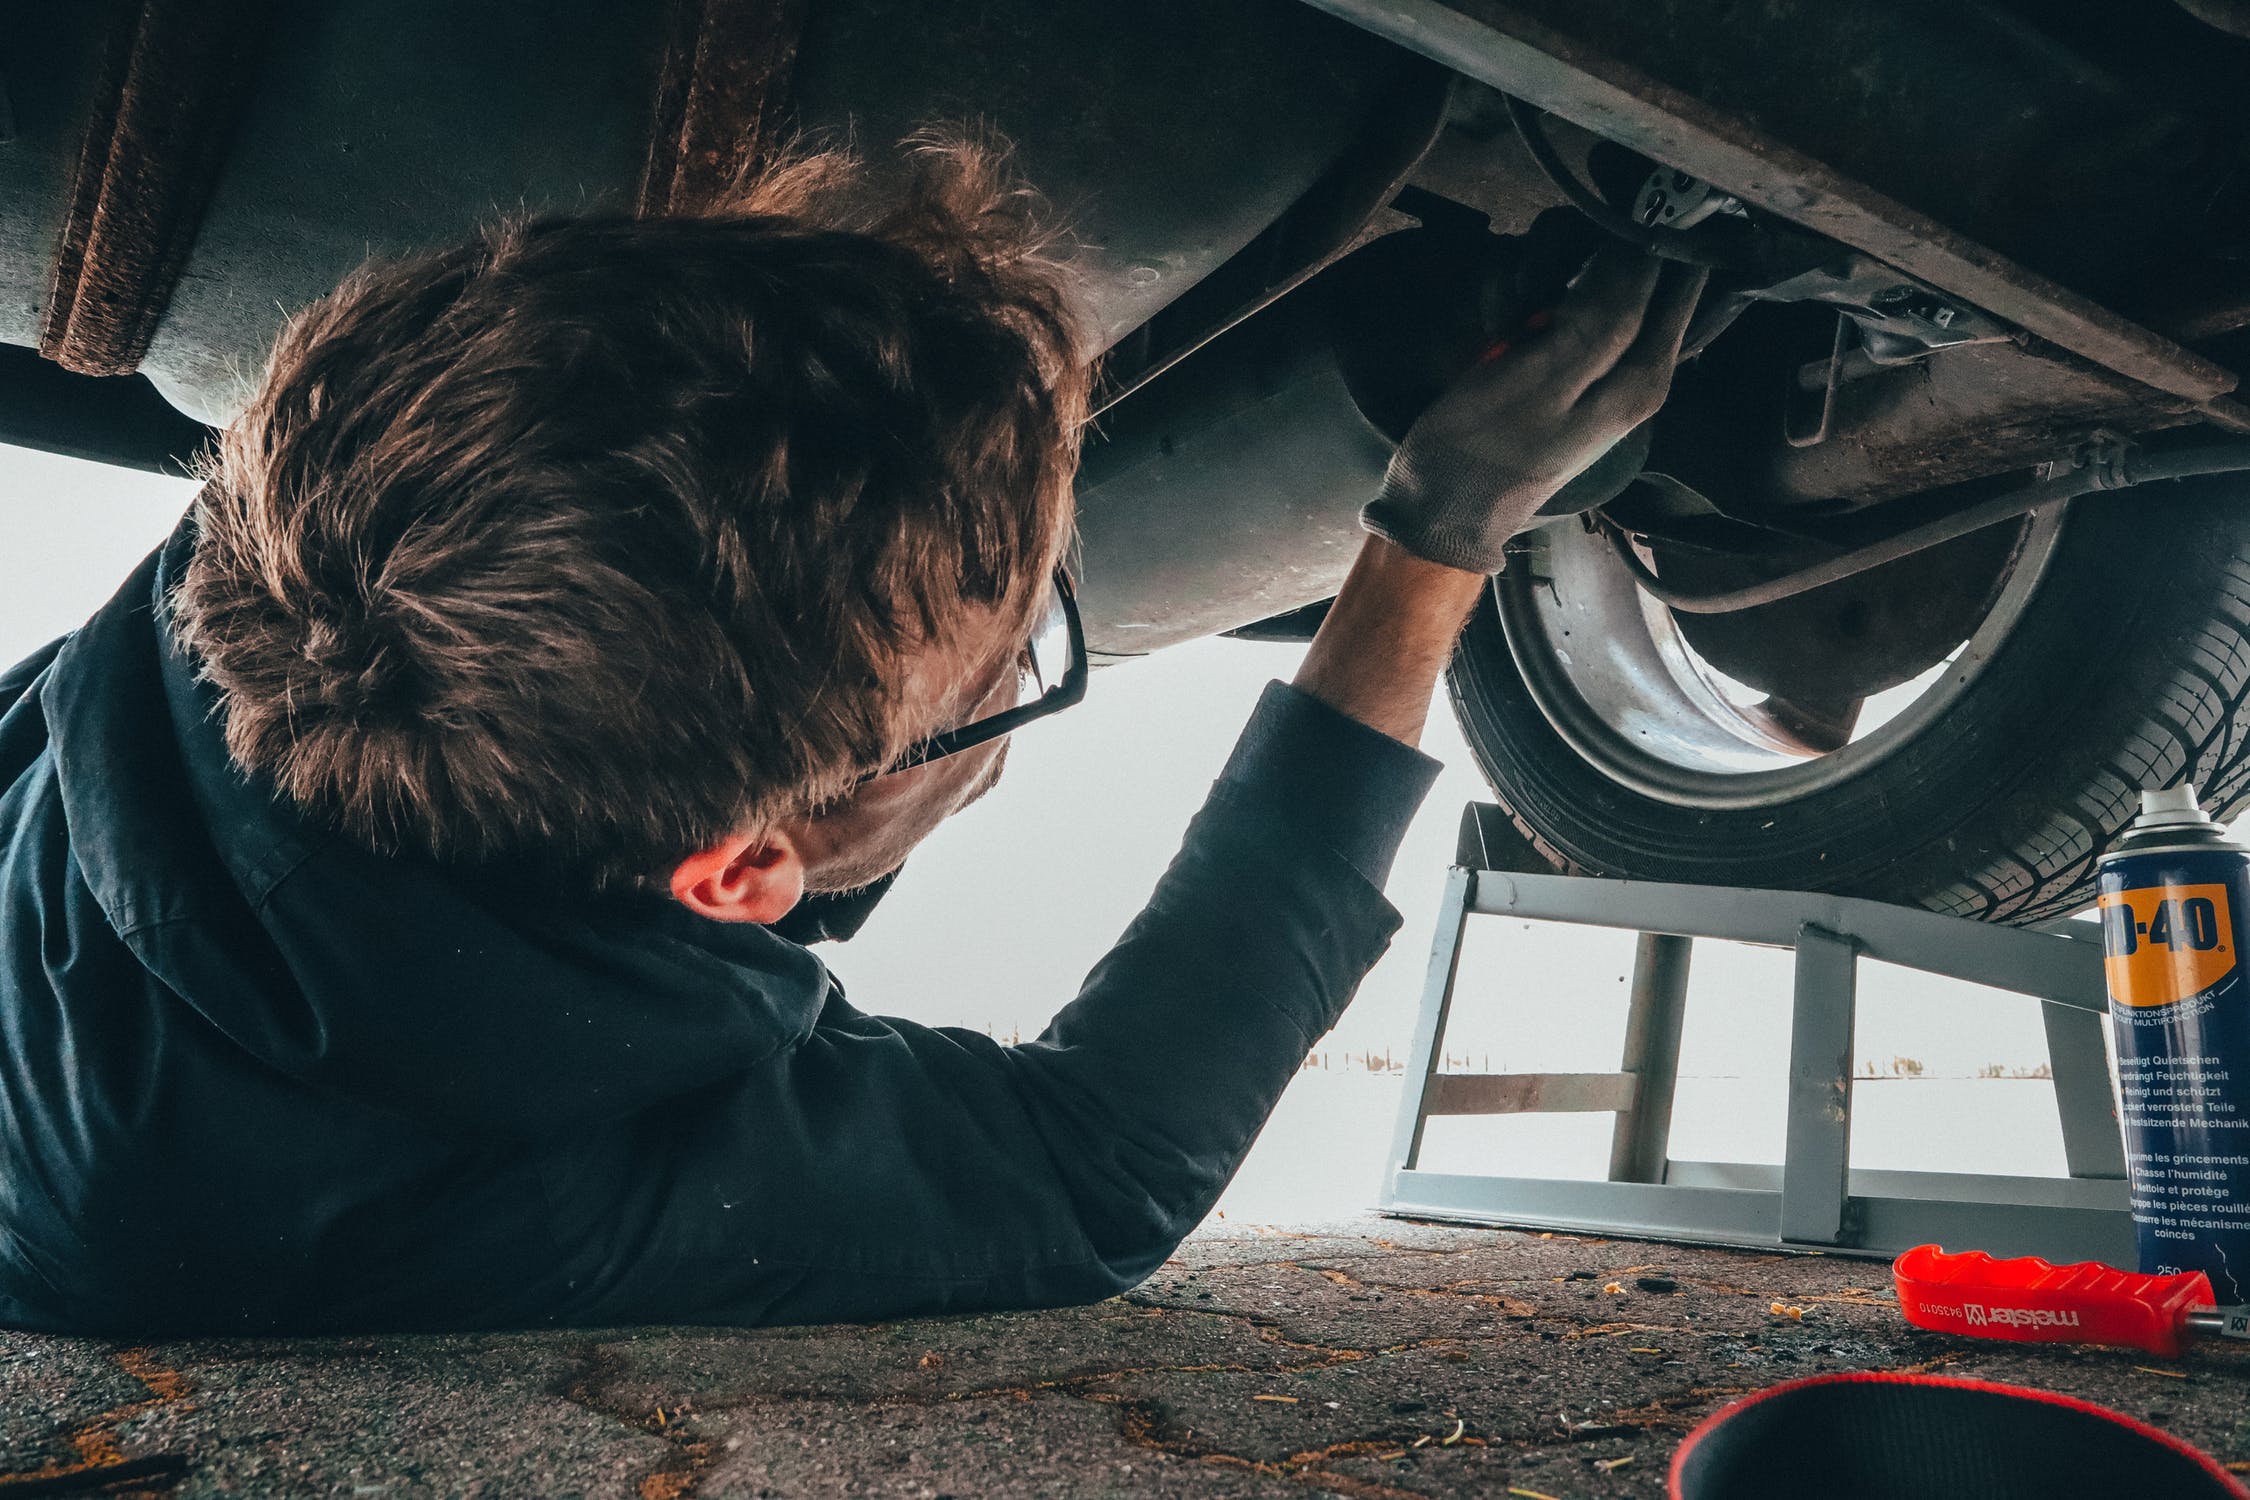 Schedule an inspection with AAMCO CO to check every part of your car.